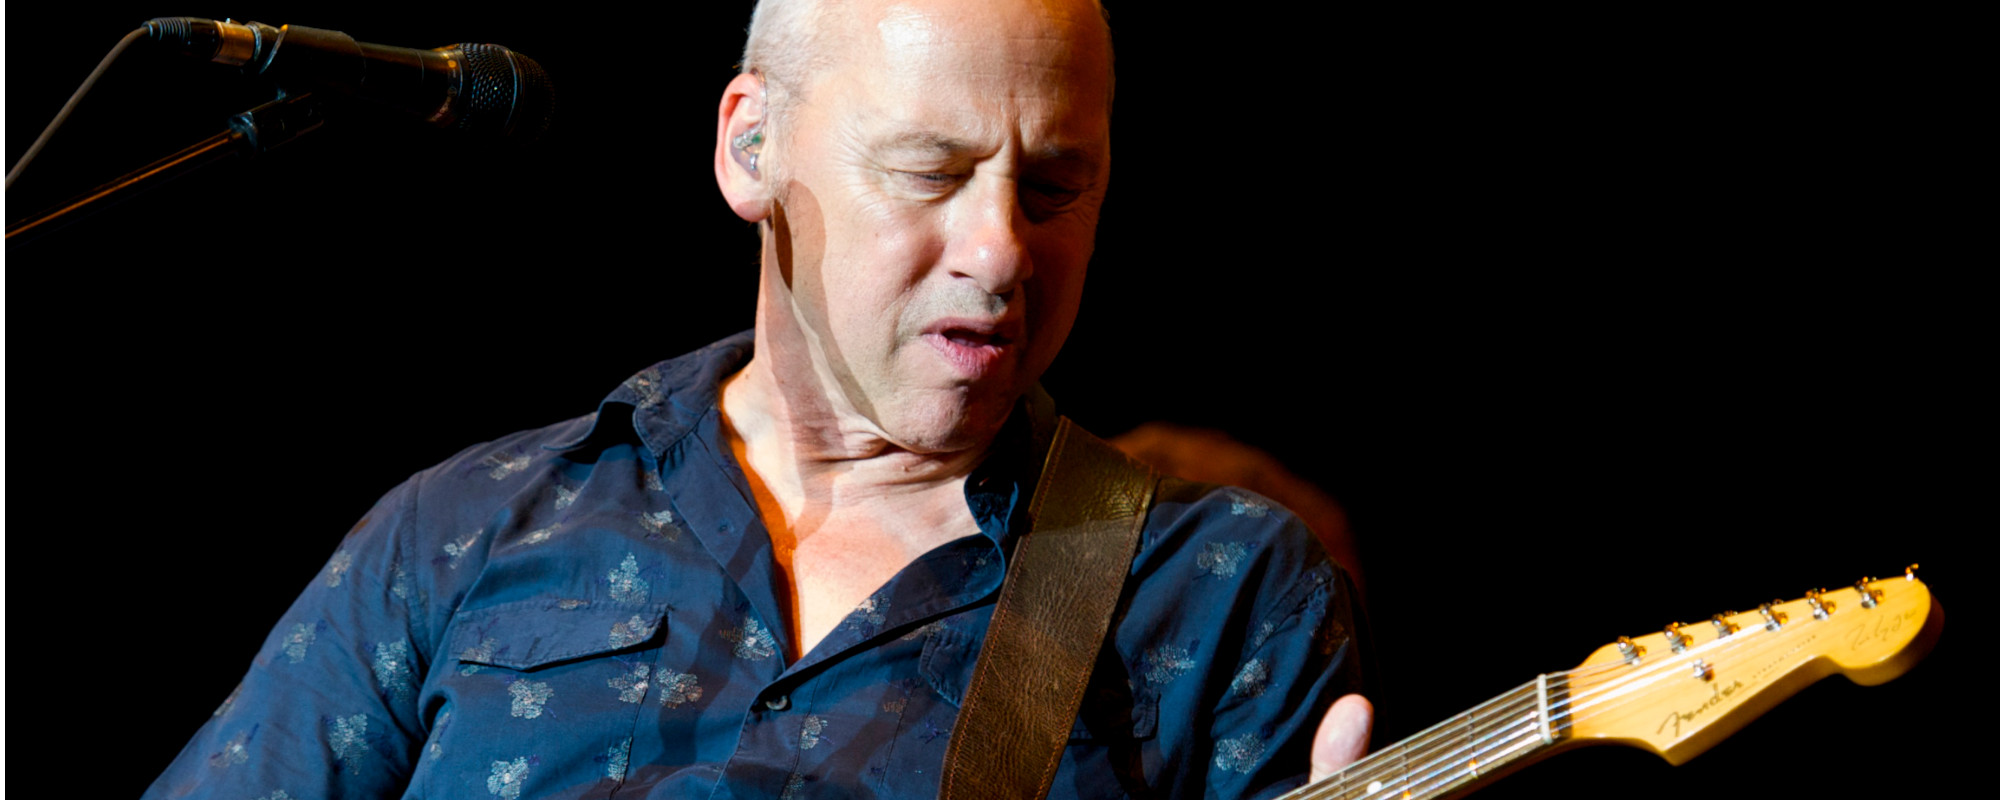 Bruce Springsteen, Brian May, Slash, and More Team Up for Star-Studded Re-Release of Mark Knopfler’s “Going Home”